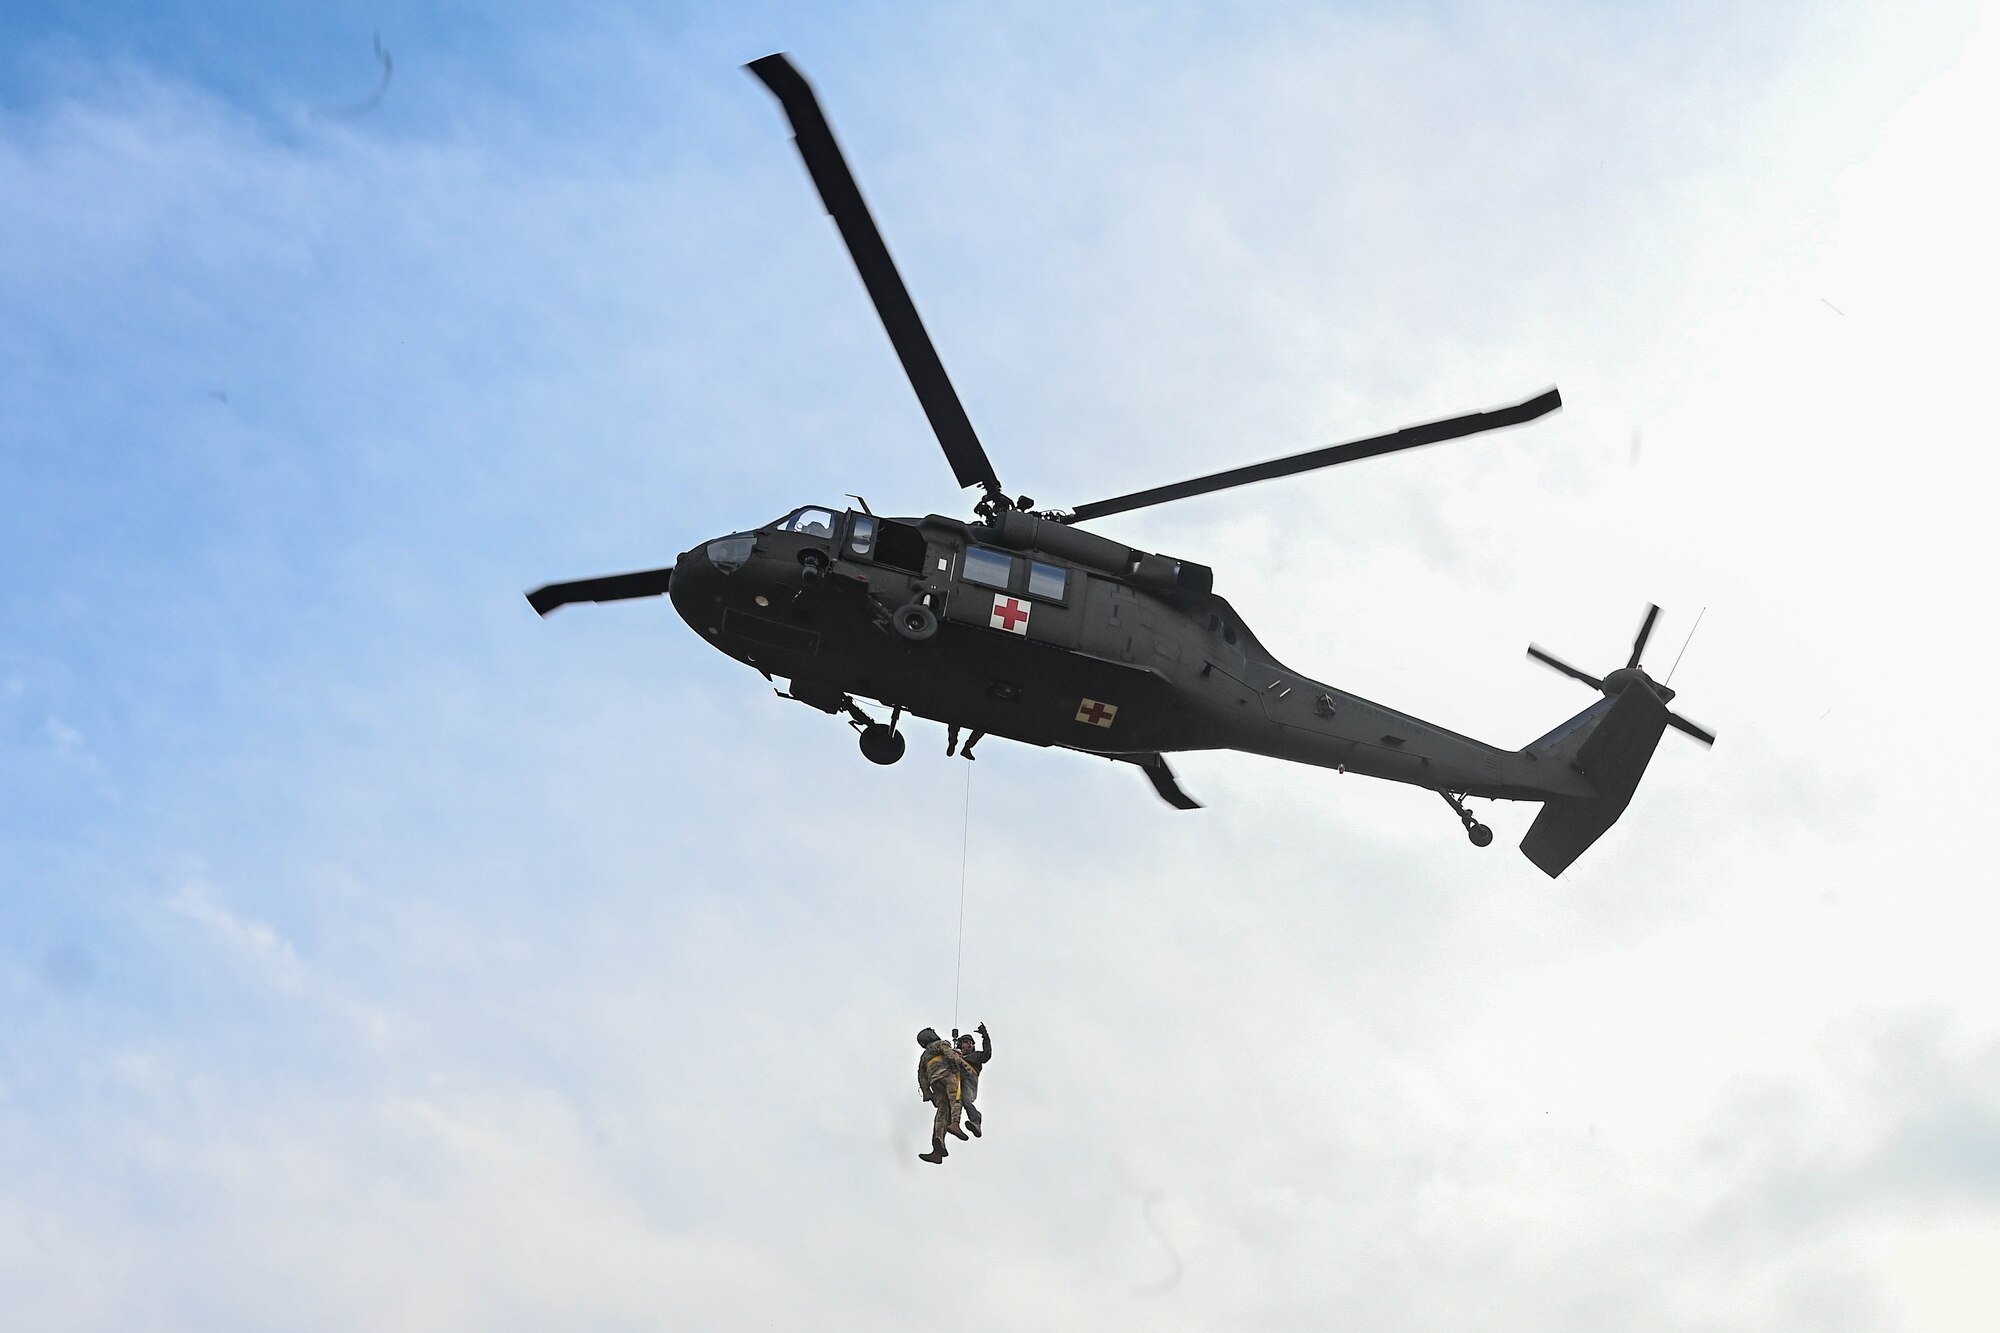 Two men are hoisted into a helicopter